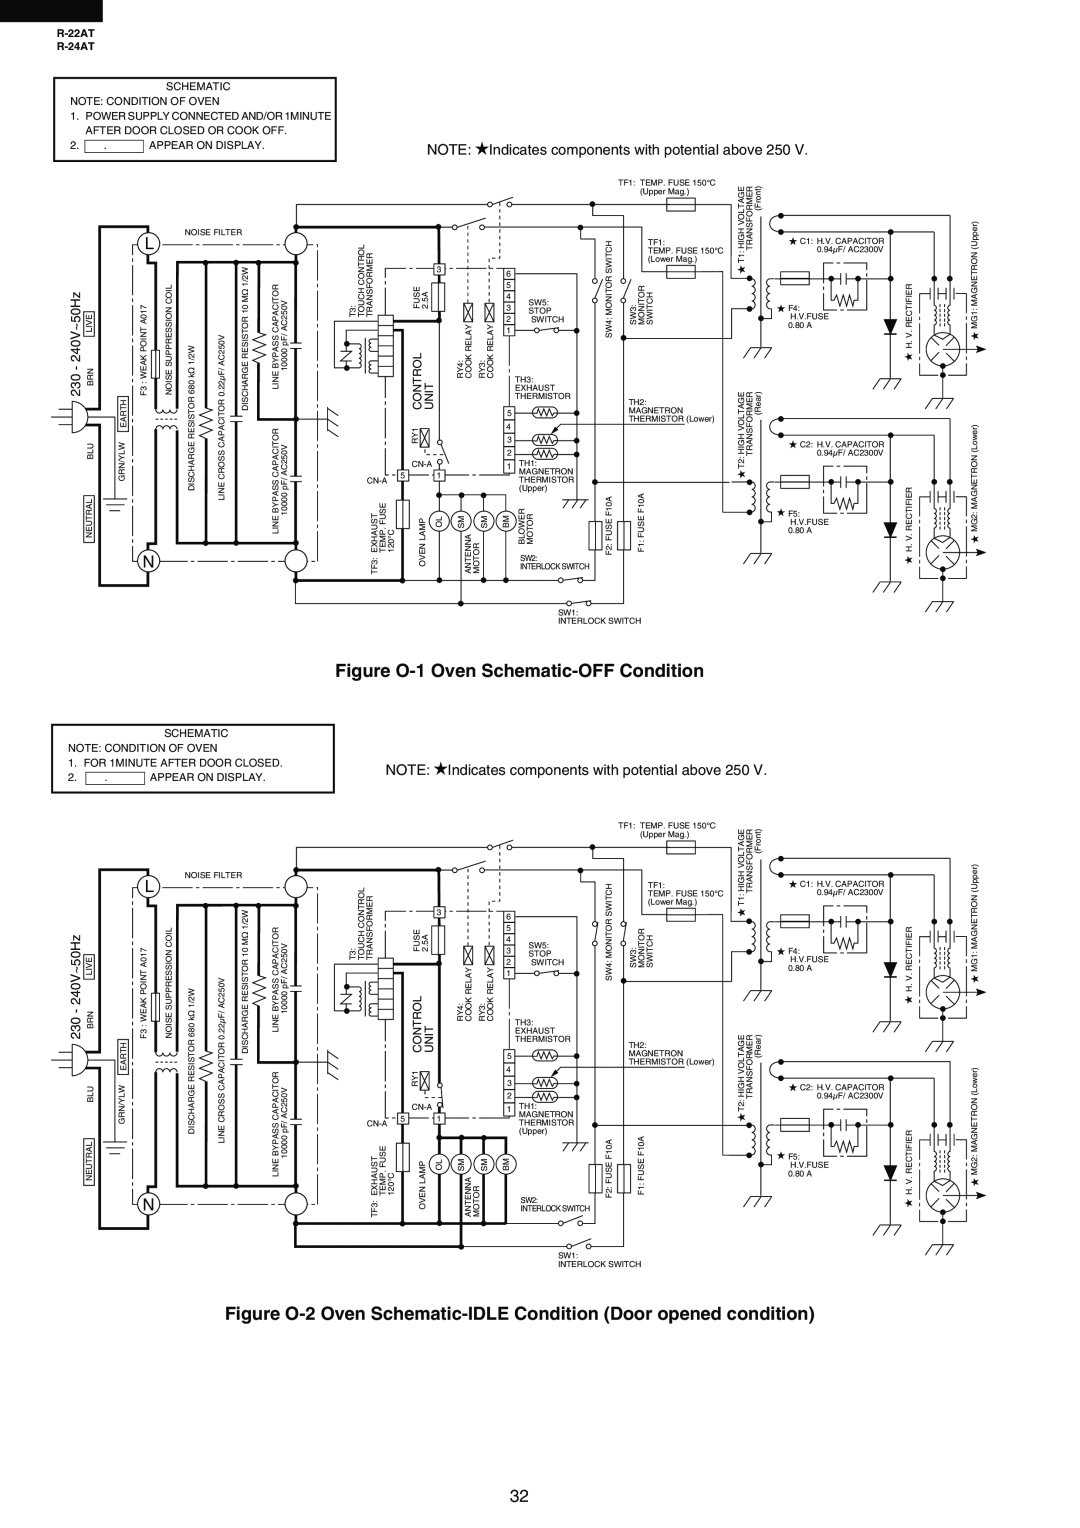 Sharp R-24AT Figure O-1 Oven Schematic-OFF Condition, Figure O-2 Oven Schematic-IDLE Condition Door opened condition 